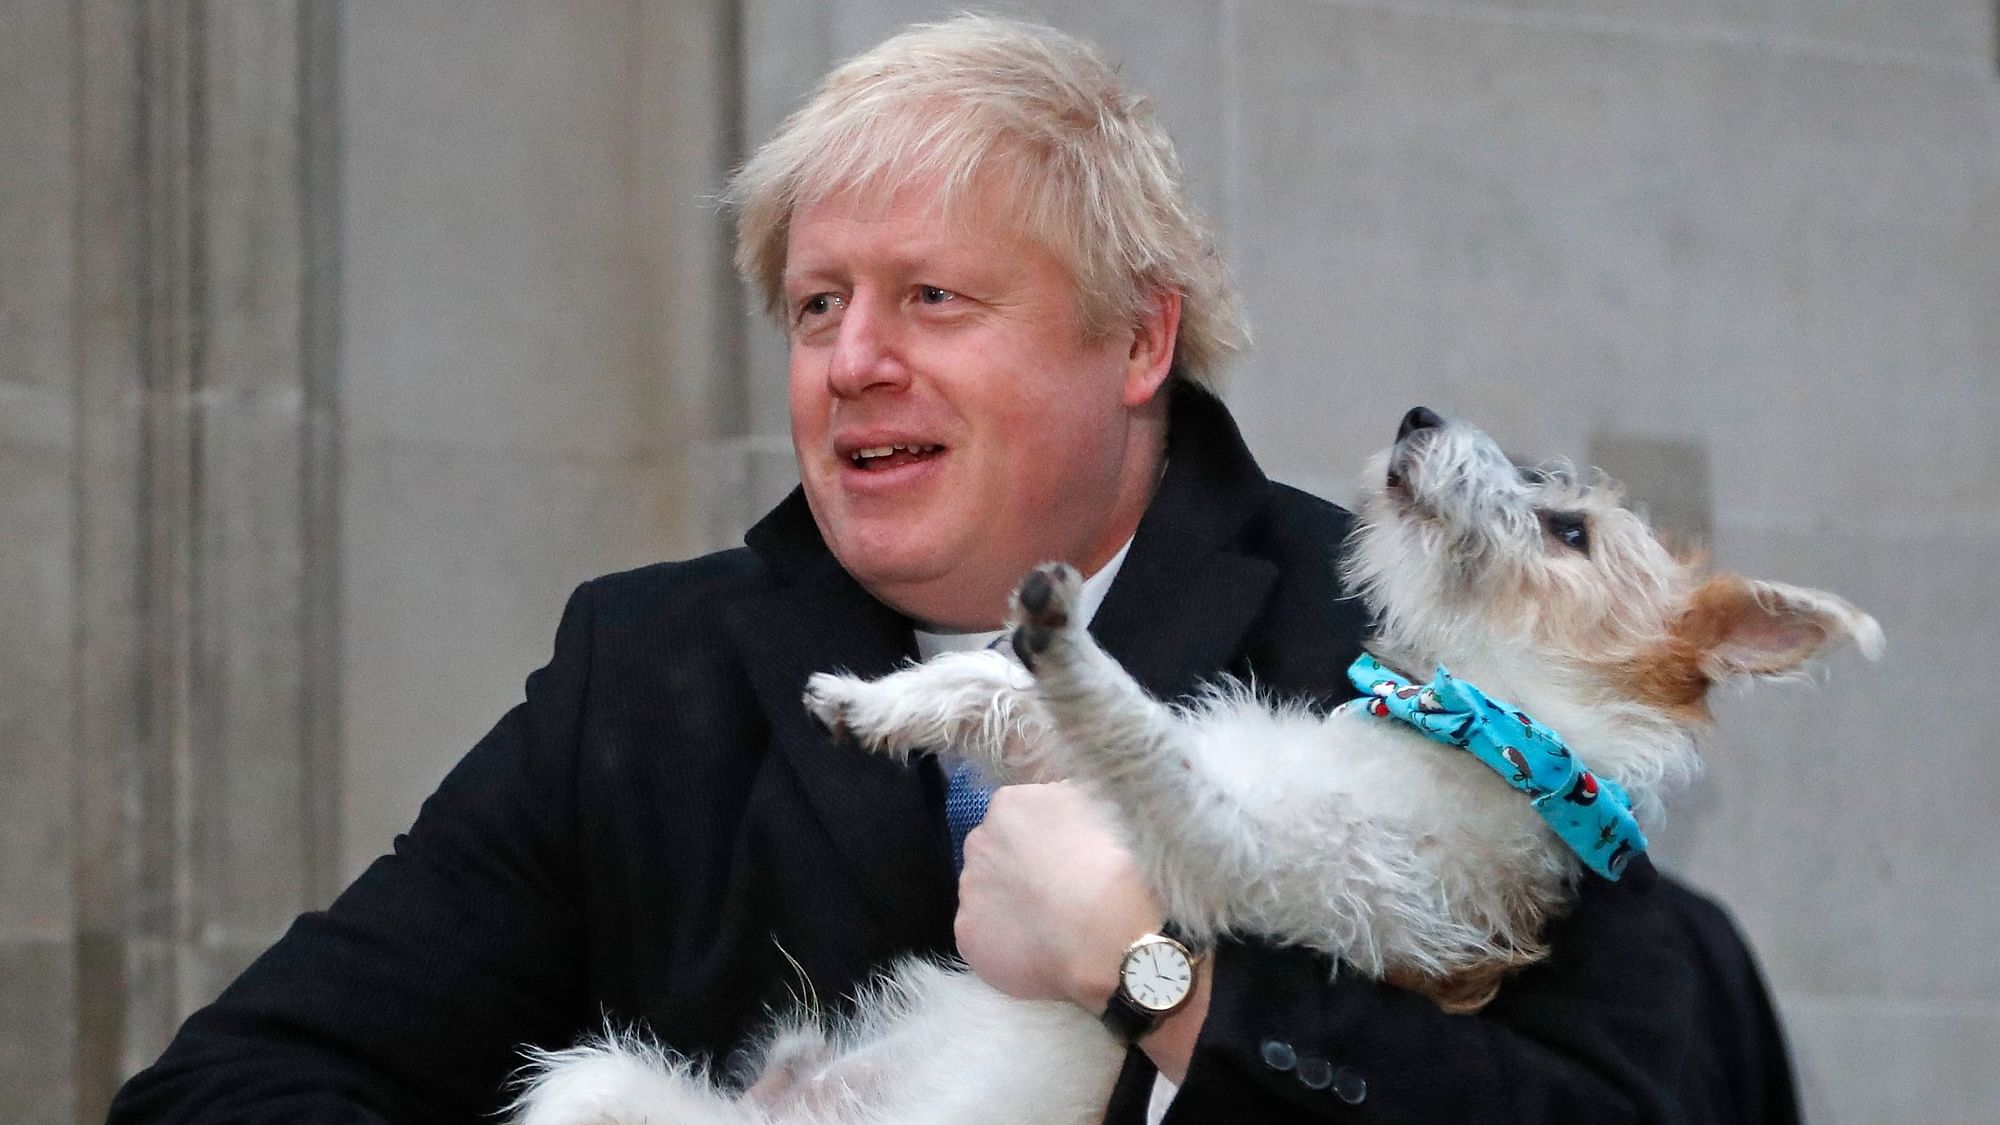 British Prime Minister Boris Johnson is likely to win the general elections, according to the exit polls.